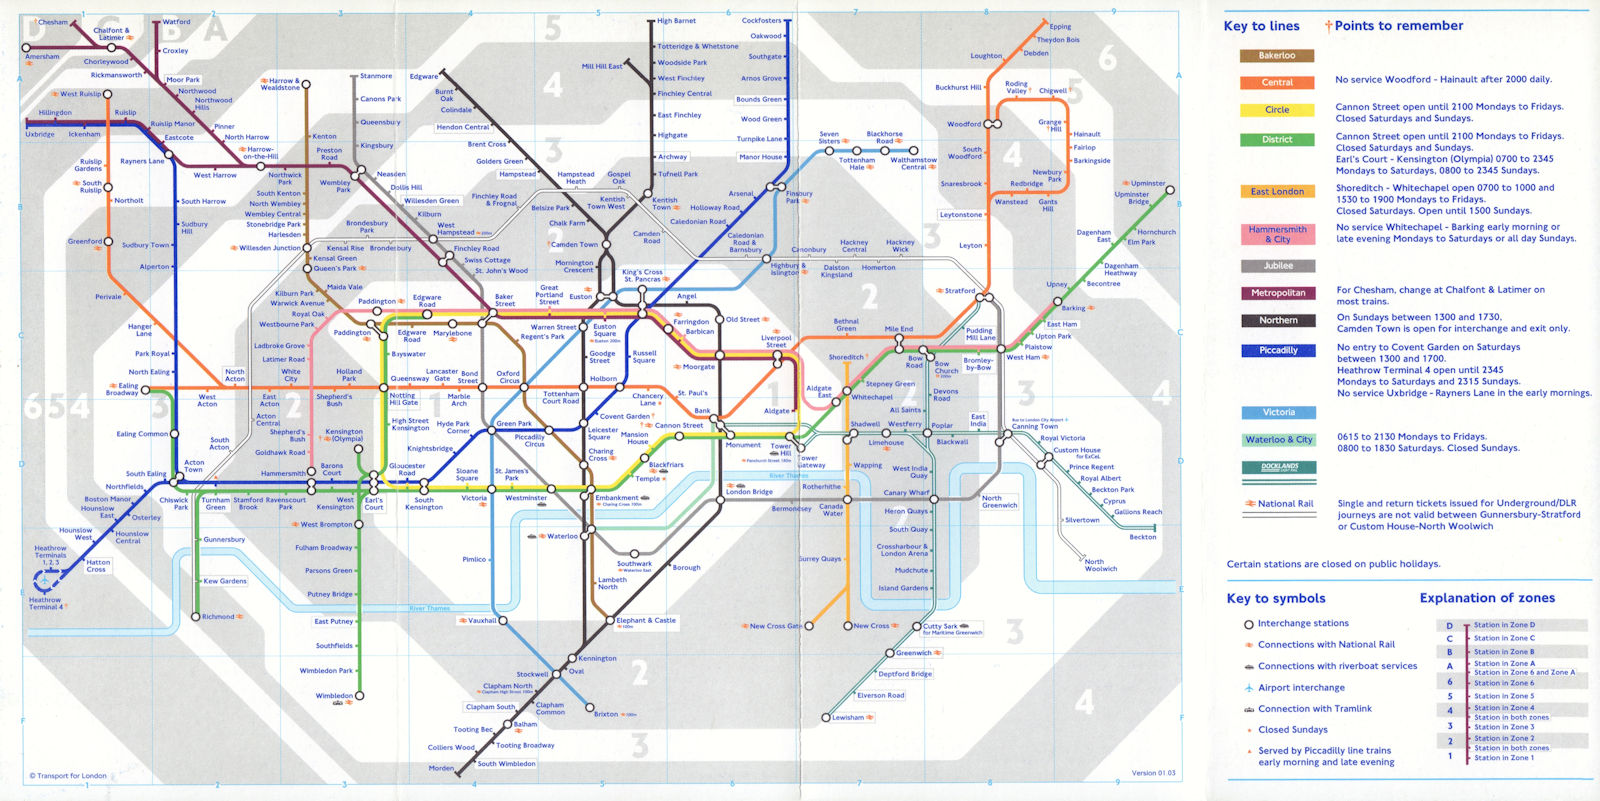 LONDON UNDERGROUND tube map. Fare zones shown. January 2003 old vintage